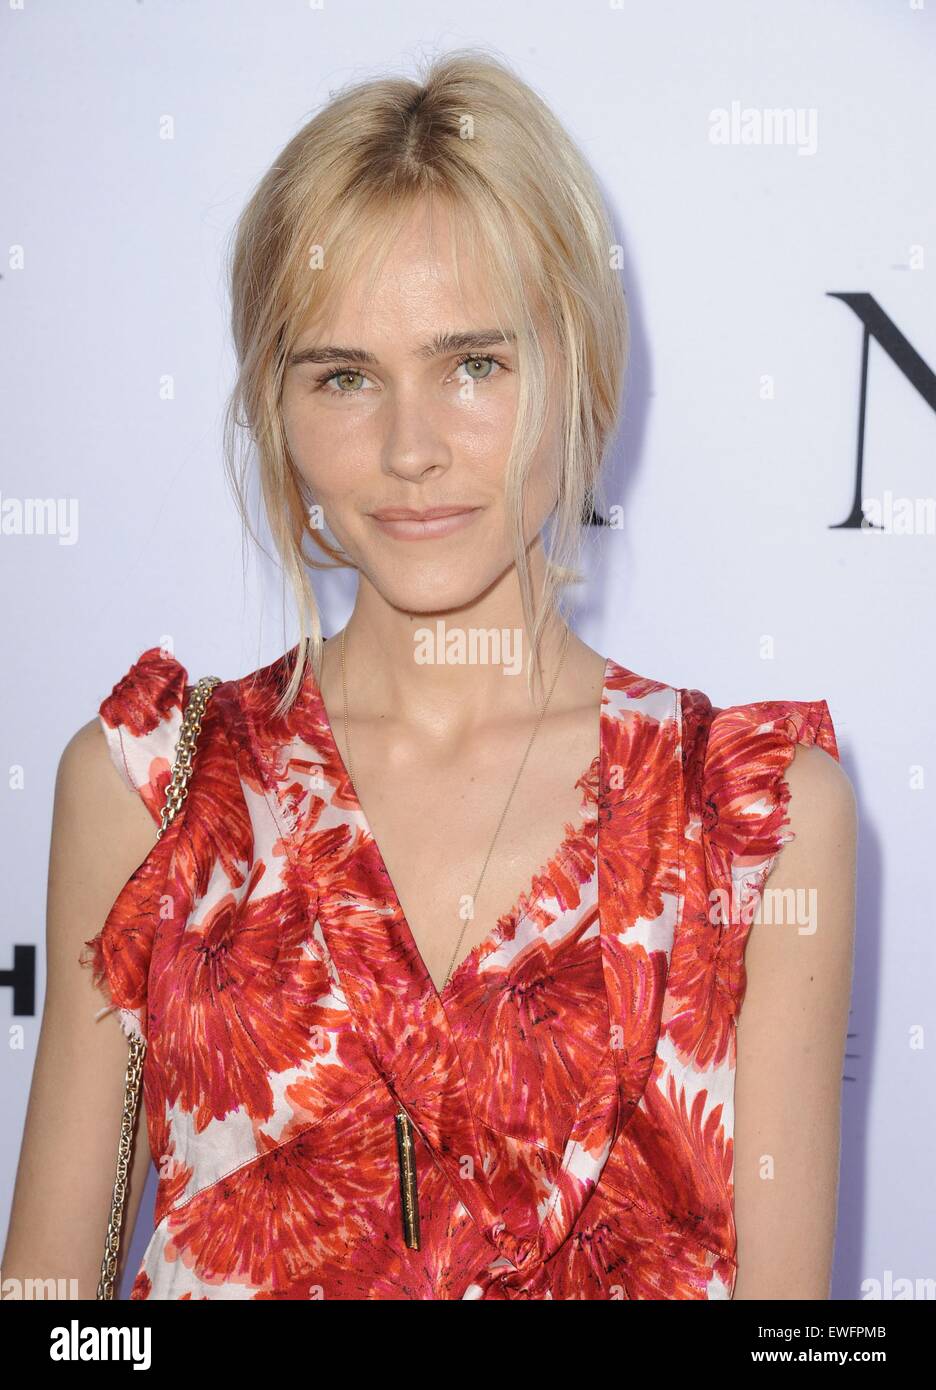 Los Angeles, California, USA. 24th June, 2015. Isabel Lucas at arrivals ...